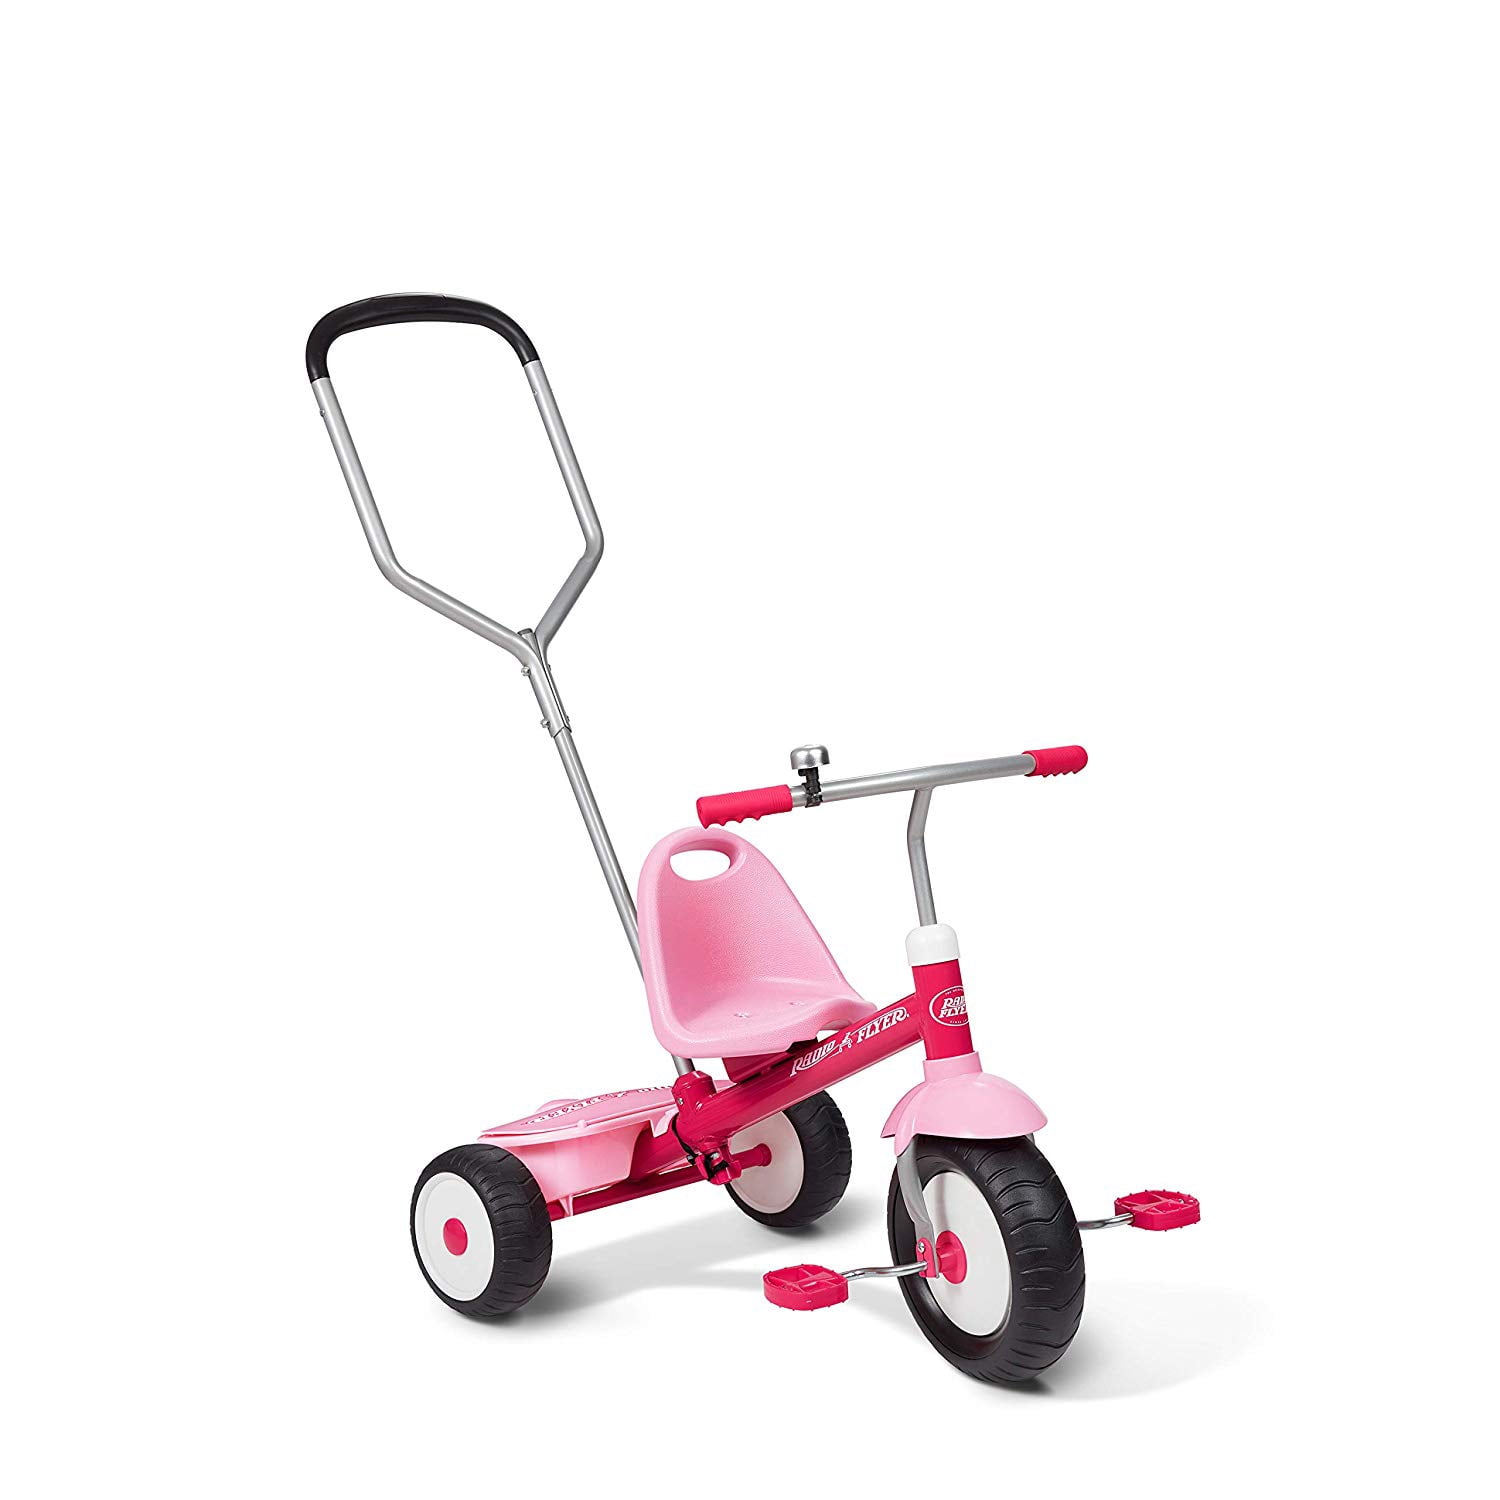 Classic Red for sale online Radio Flyer 10 in Tricycle 